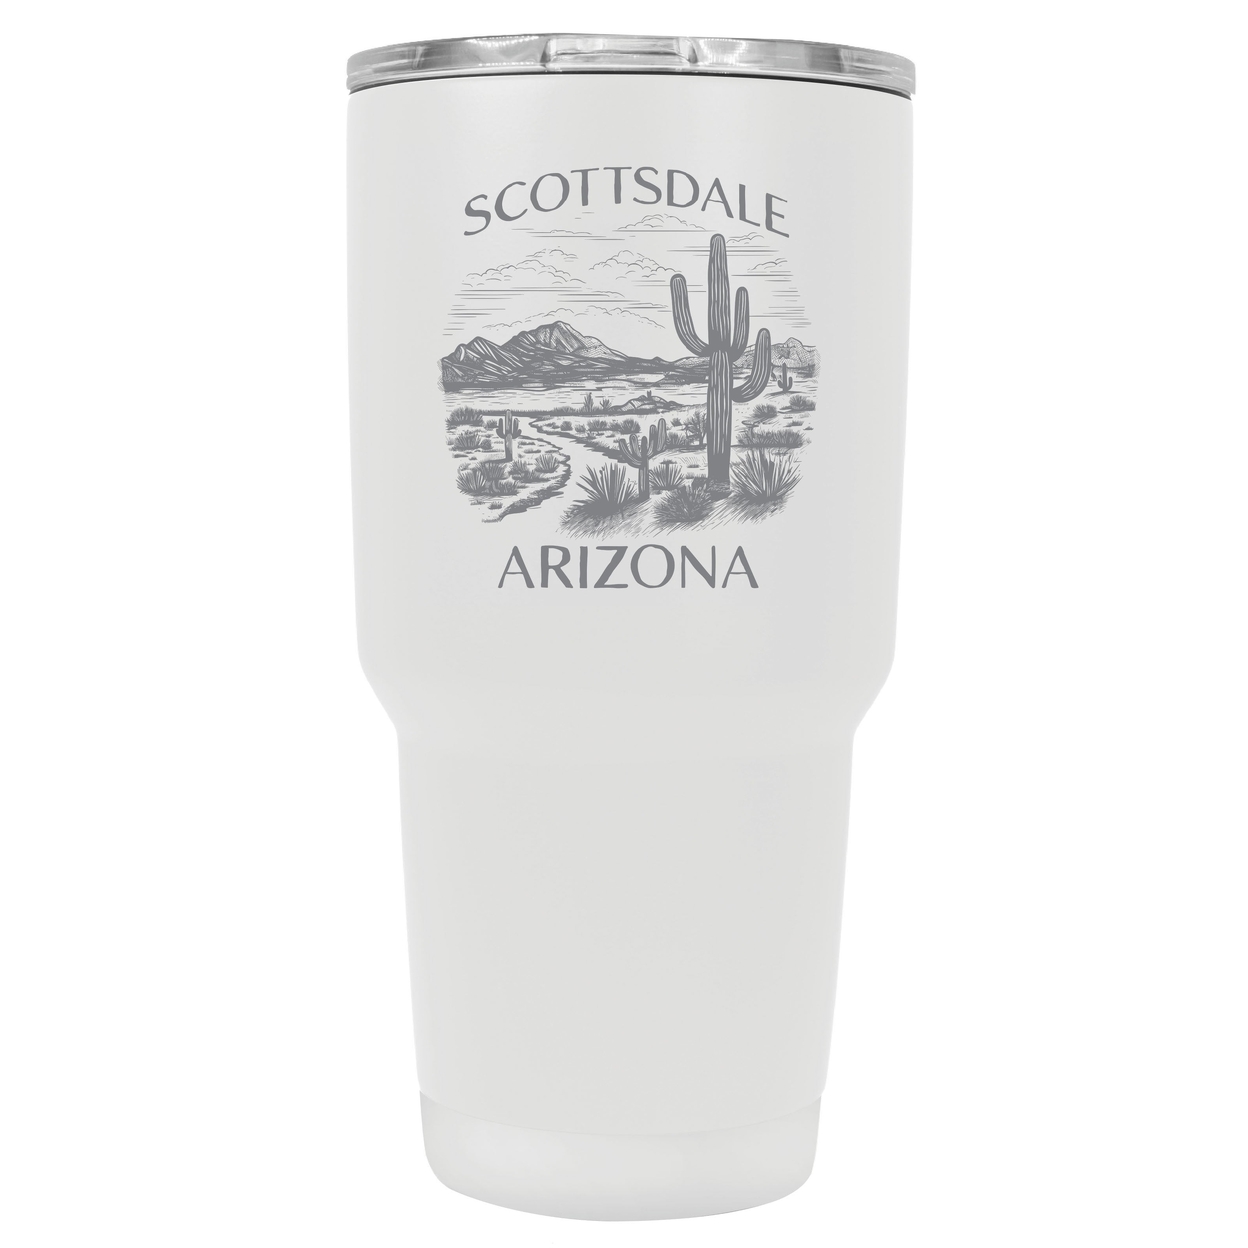 Scottsdale Arizona Souvenir 24 Oz Engraved Insulated Stainless Steel Tumbler - Coral,,2-Pack